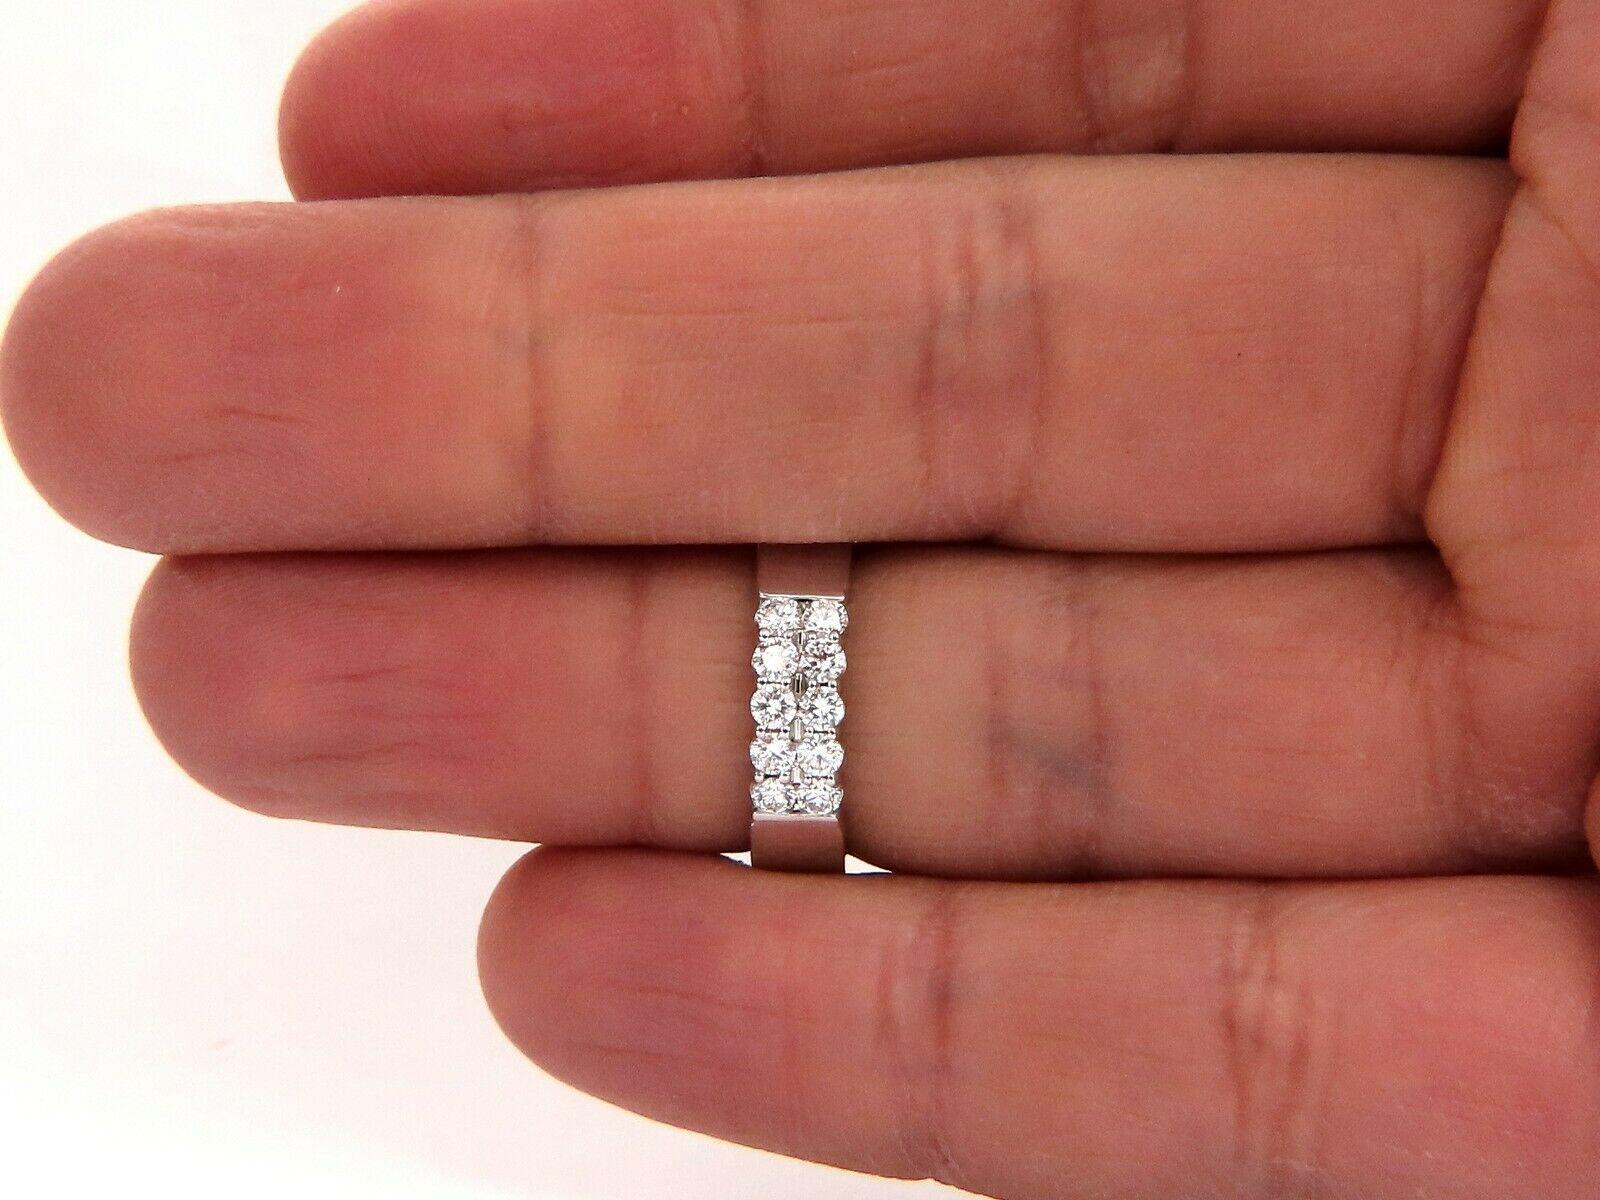 Double Row / Common sharing prong band

.60ct Natural Diamonds

 Full cut, Rounds 

F color, Vs-1 clarity

14kt. white gold

5.2 Grams

5mm wide (top diamond rows)

2.2mm depth

current size: 6.25

We may resize (please inquire).

$3600 appraisal